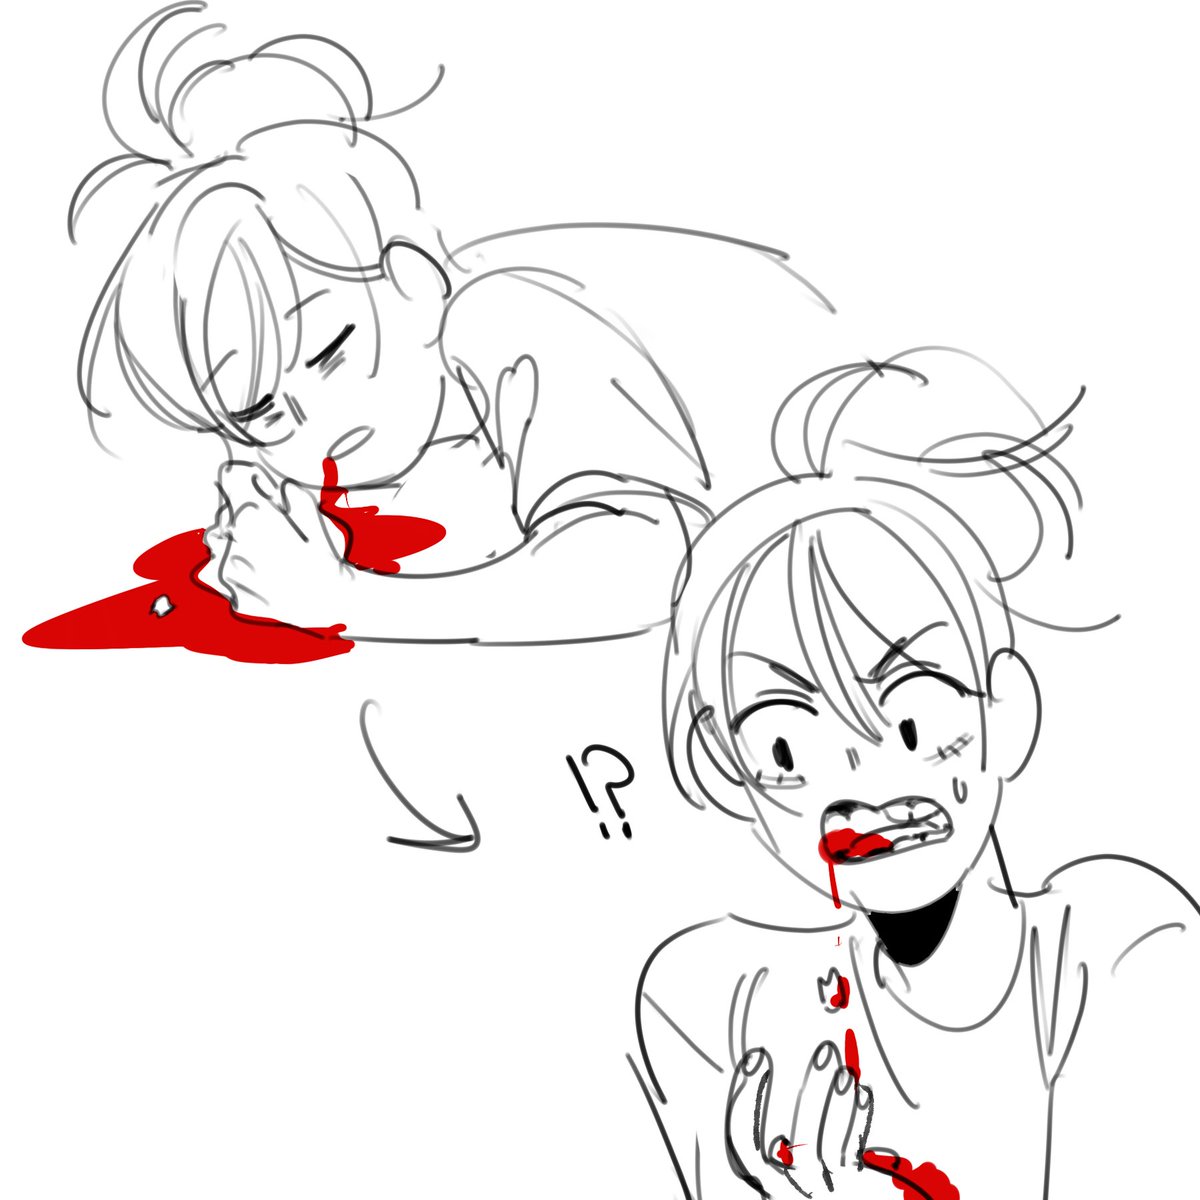 TW: BLOOD, GORE
ive been having VERY weird dreams lately & i decided to draw some of them.

1st i dreamt about my teeth falling off. Then i dreamt about having to dispose of a decapitated head in a jar without getting caught by brgy tanods 